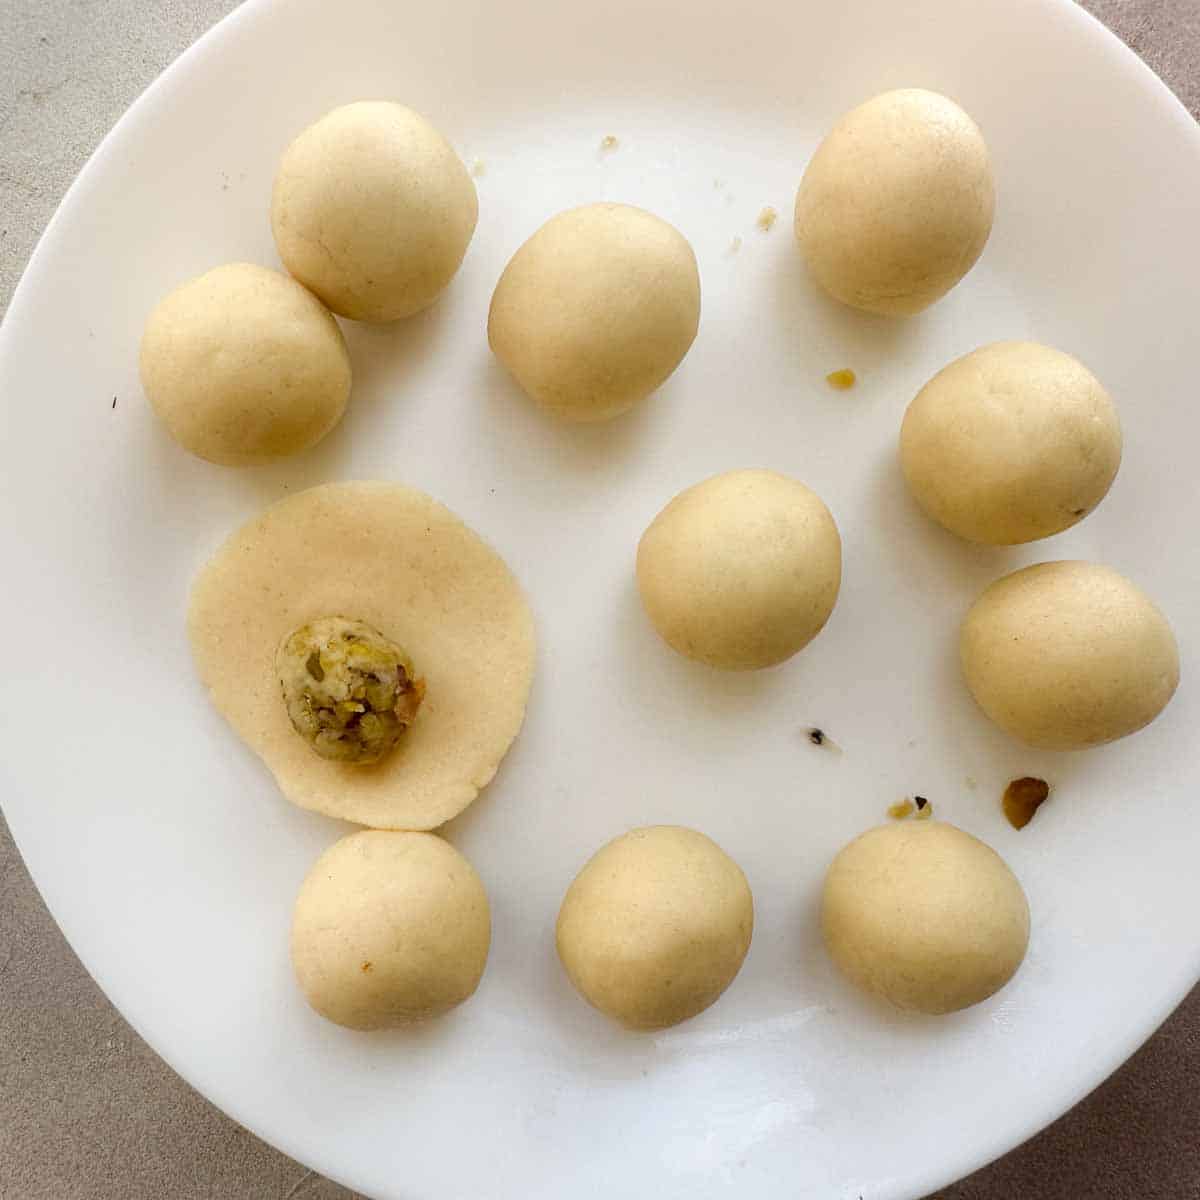 Plate of stuffed gulab jamun. One jamun is not yet formed and has the plain dough rolled into a disc and pistachios in the center.